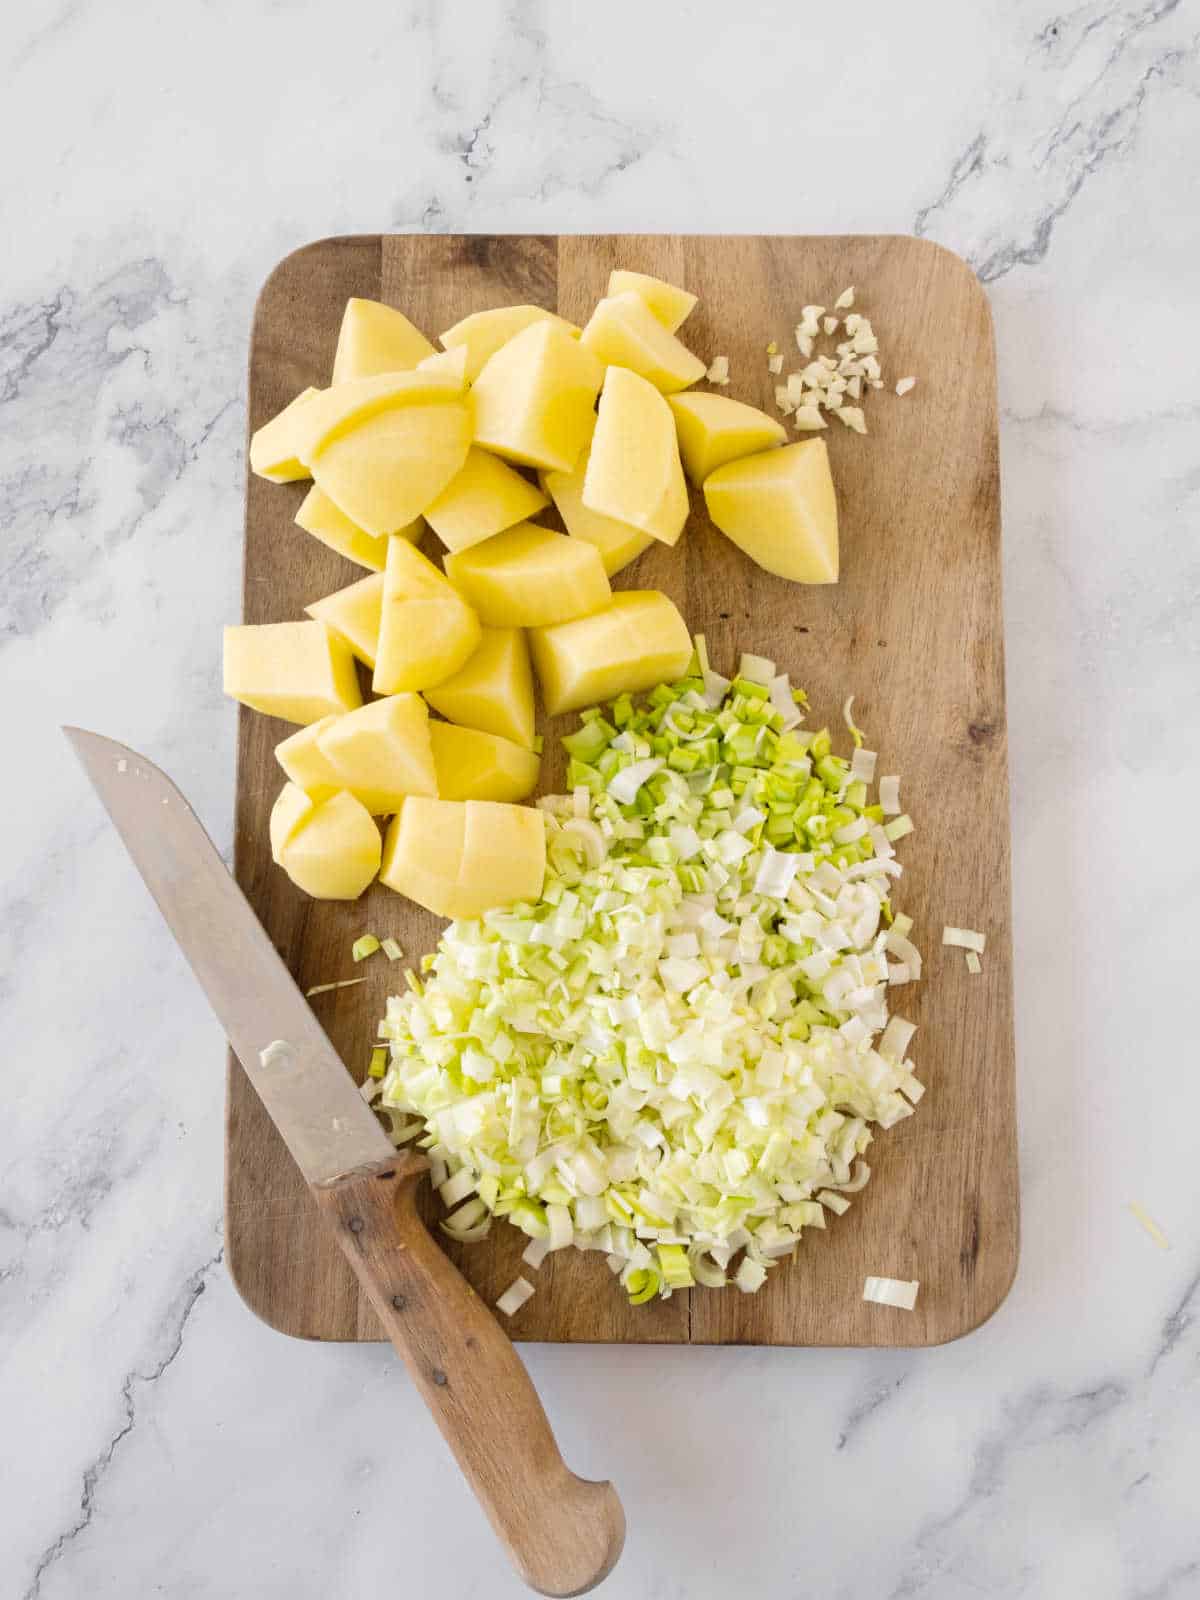 Chopped leeks, garlic and potato pieces on a wooden board. White marbled surface.